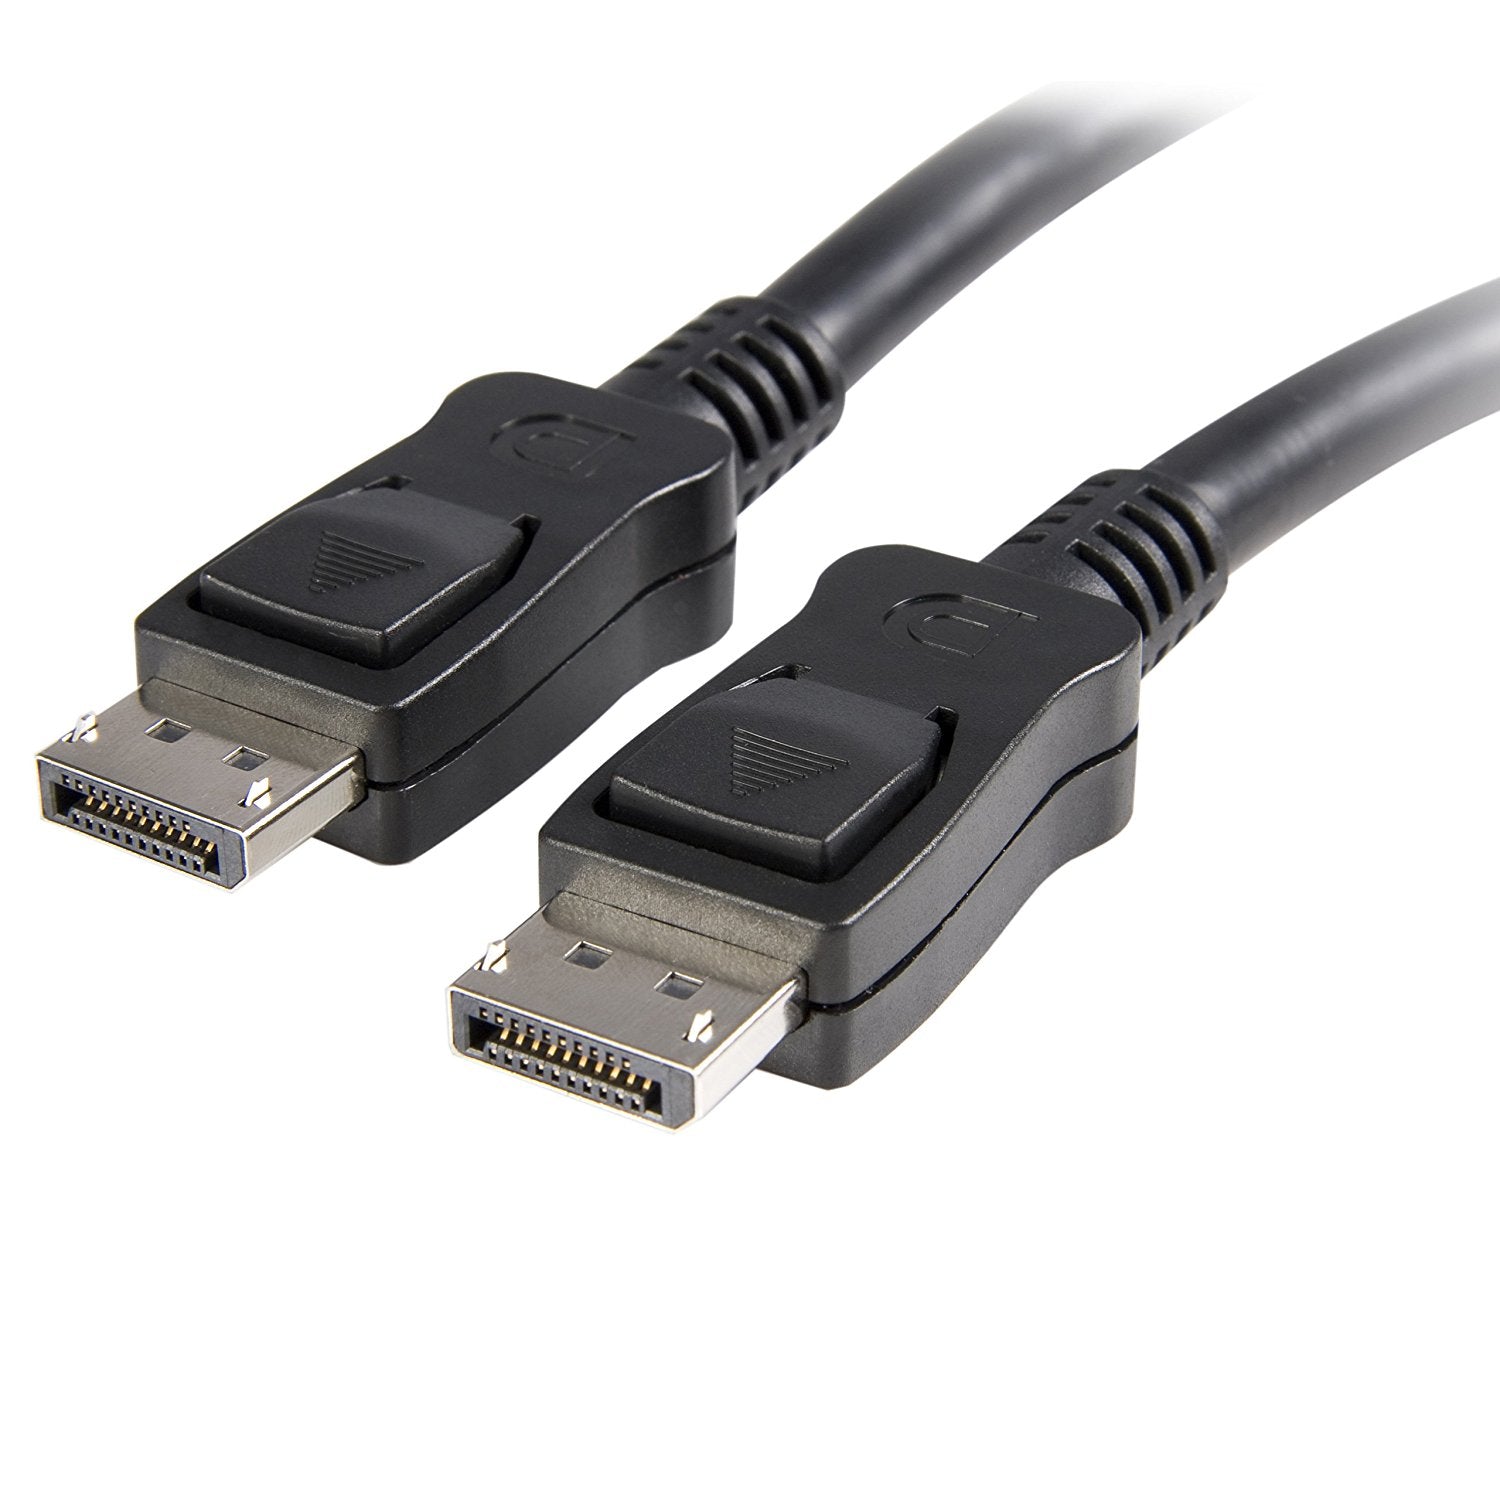 StarTech.com 6 FT DISPLAYPORT VIDEO CABLE WITH LATCHES(DISPLPORT6L NEW)